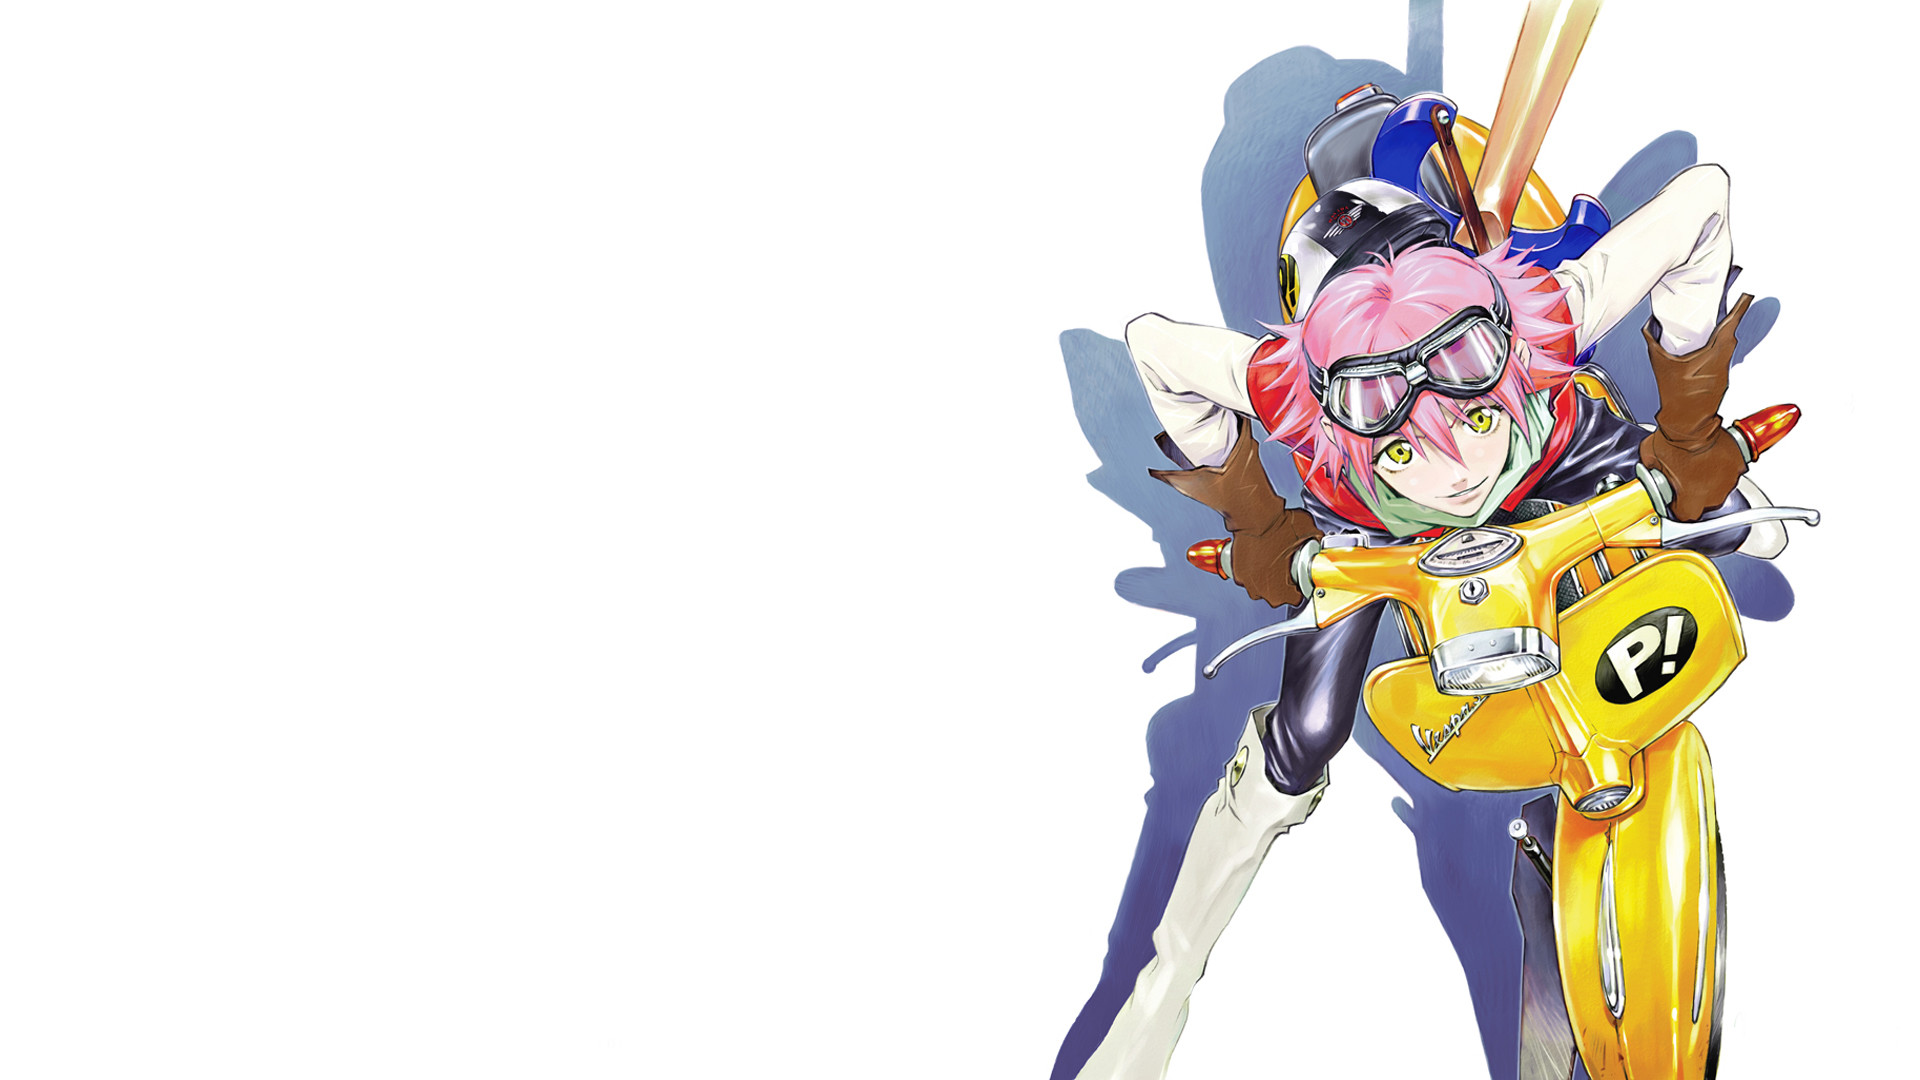 1920x1080 FLCL Fooly Cooly Haruhara Haruko simple background wallpaper |  |  226498 | WallpaperUP